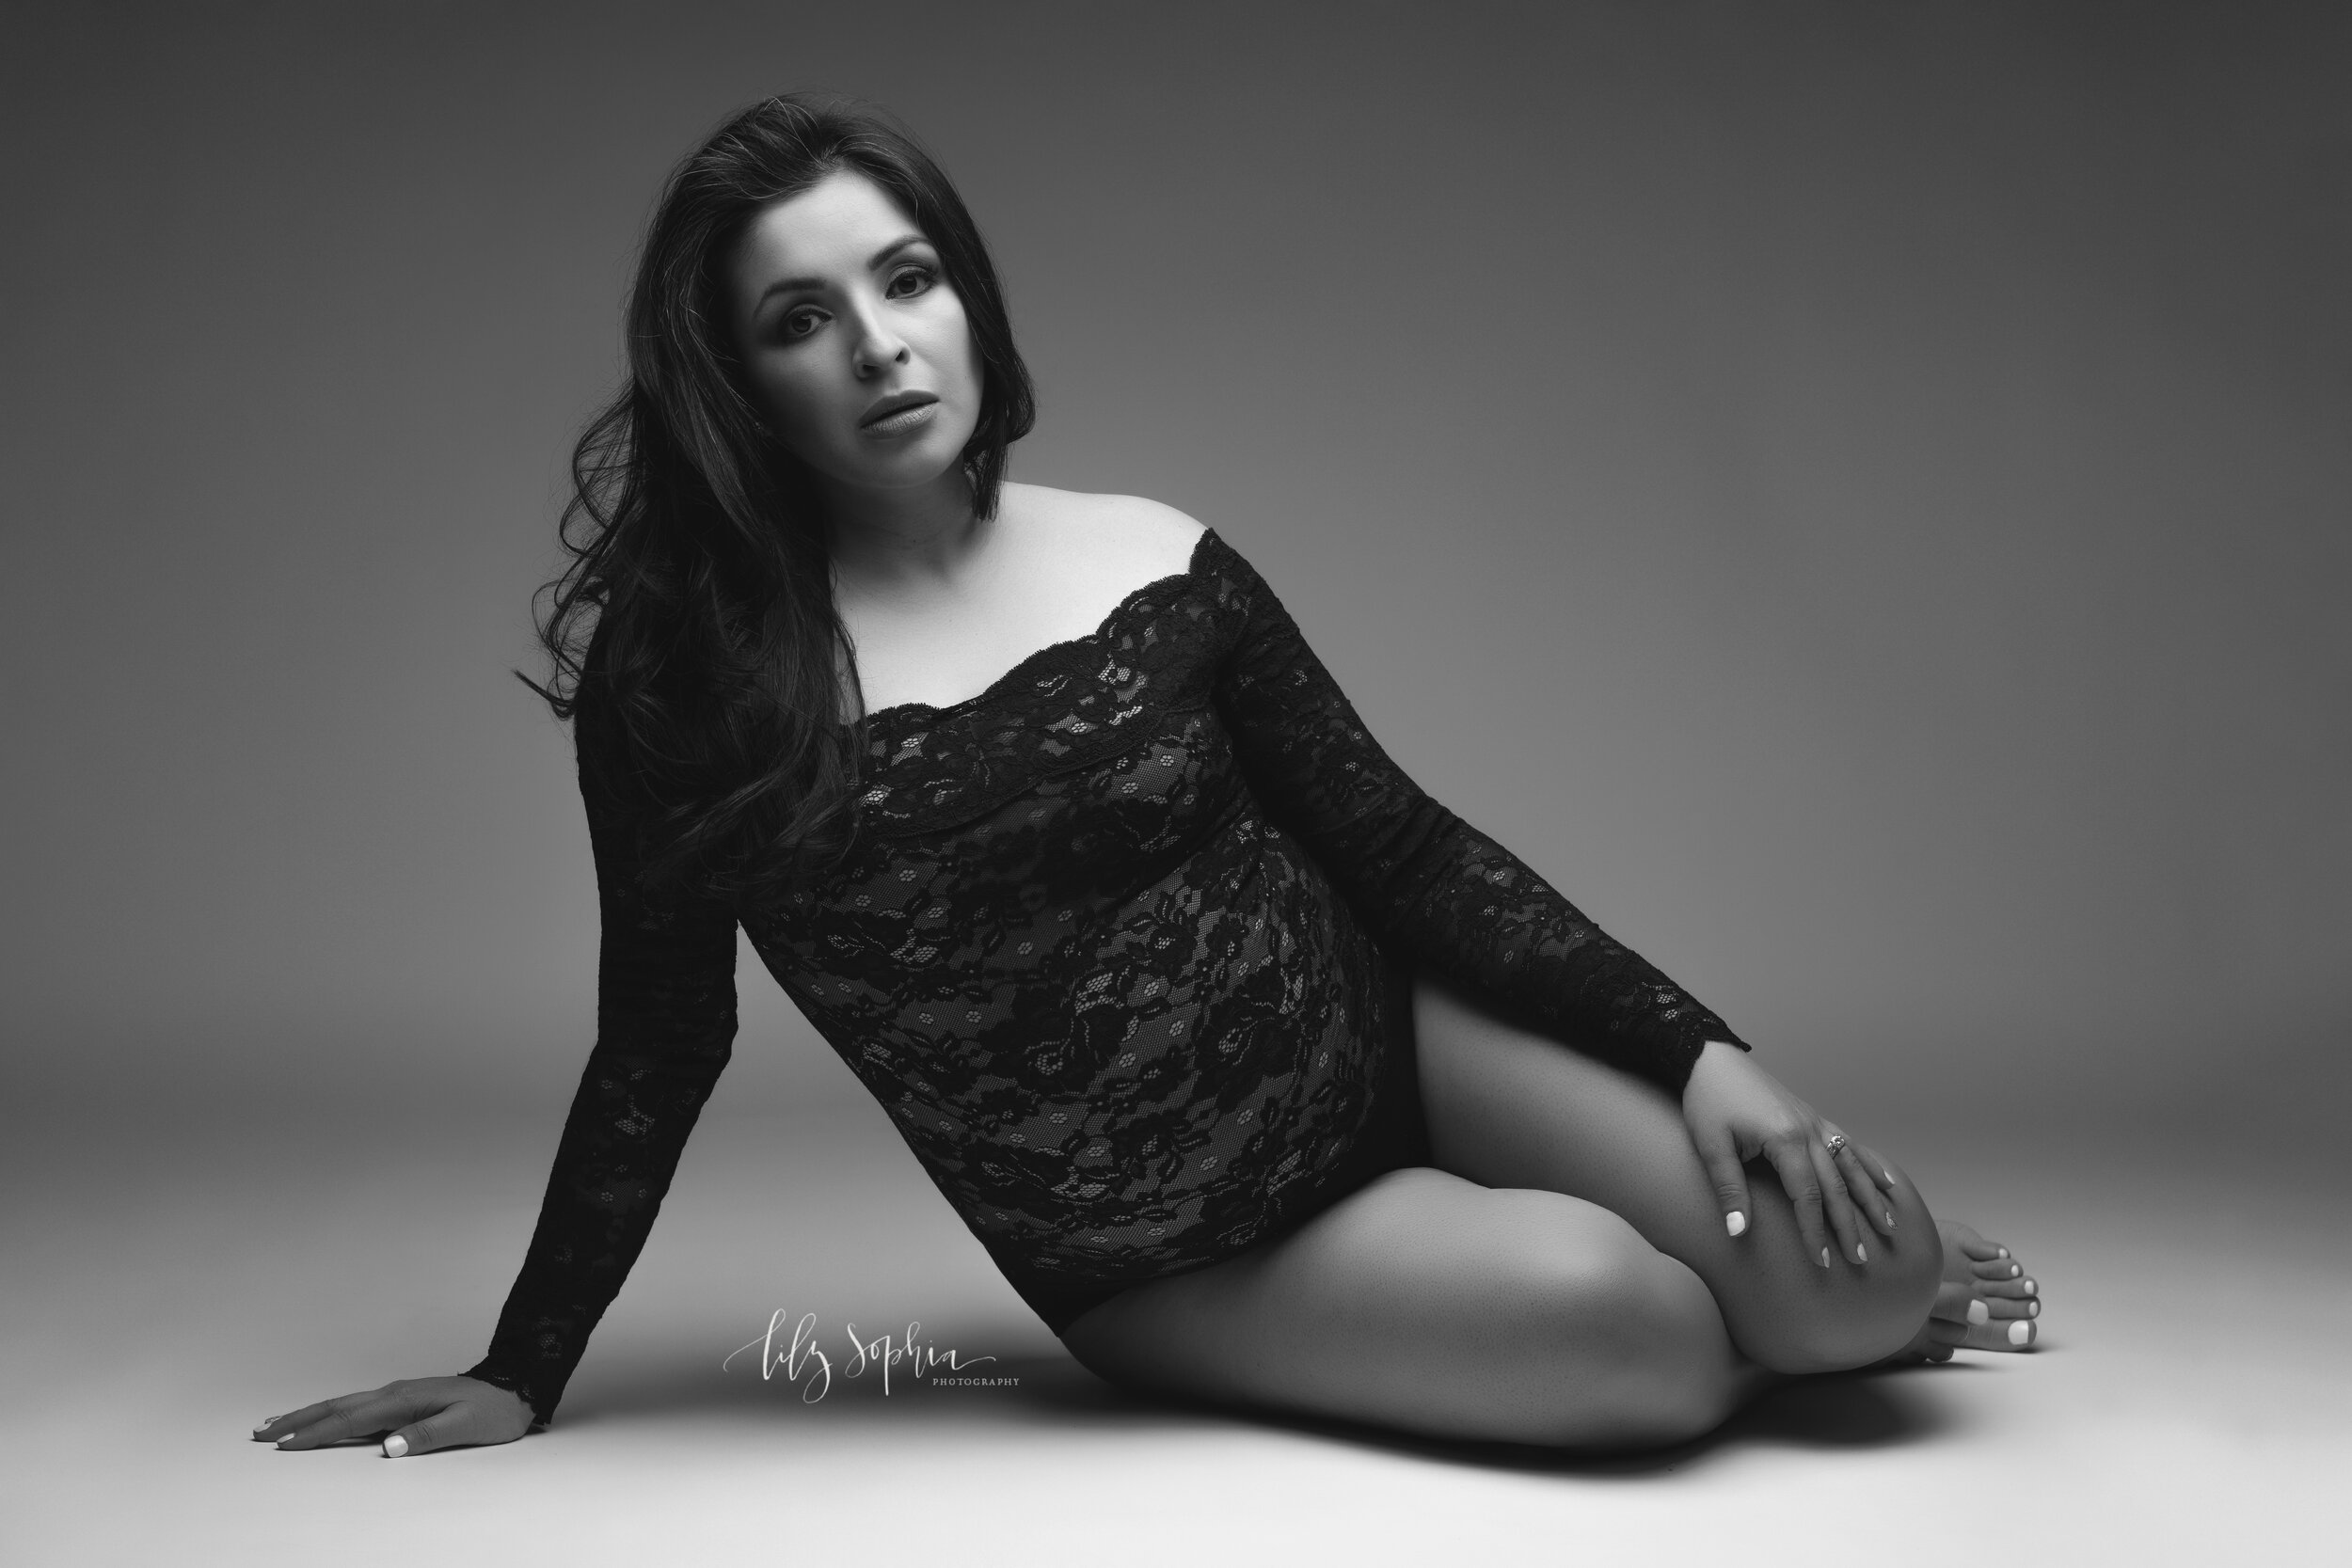  Black and white maternity fine art image of beautiful pregnant Hispanic woman with long dark hair dressed in black lace bodysuit sitting on floor in the Atlanta studio of Lily Sophia Photography.  